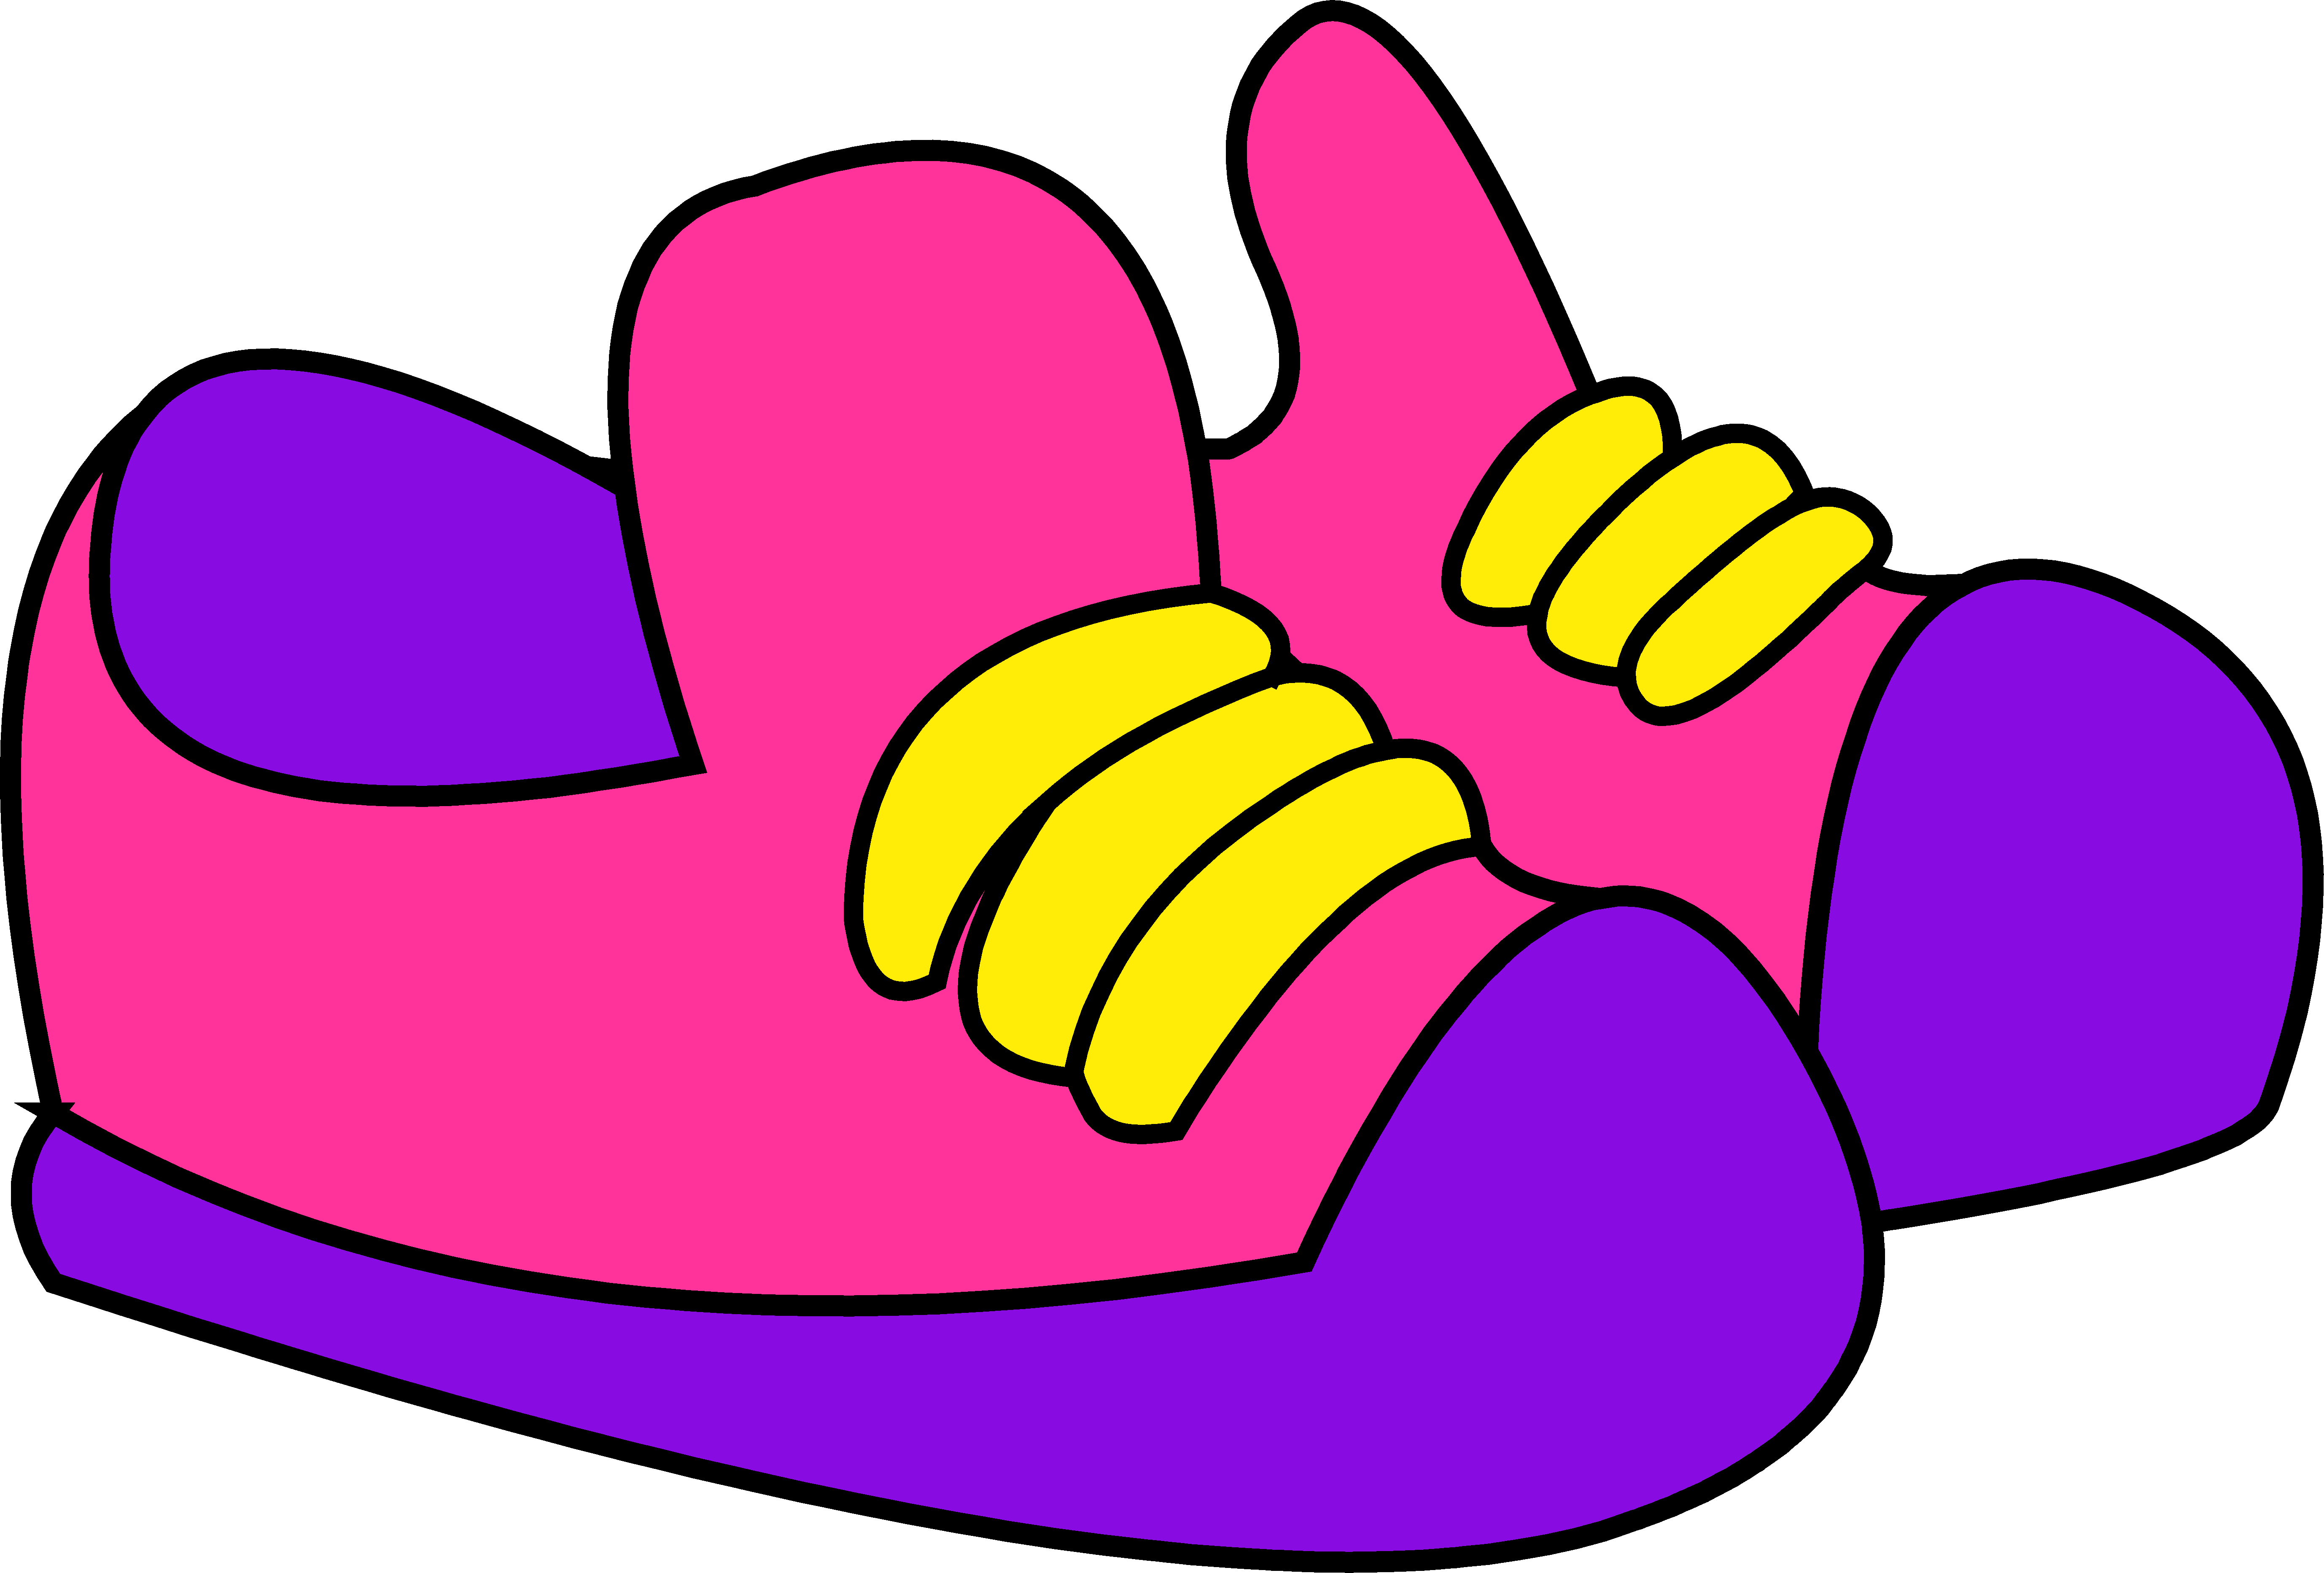 Animated shoes clipart